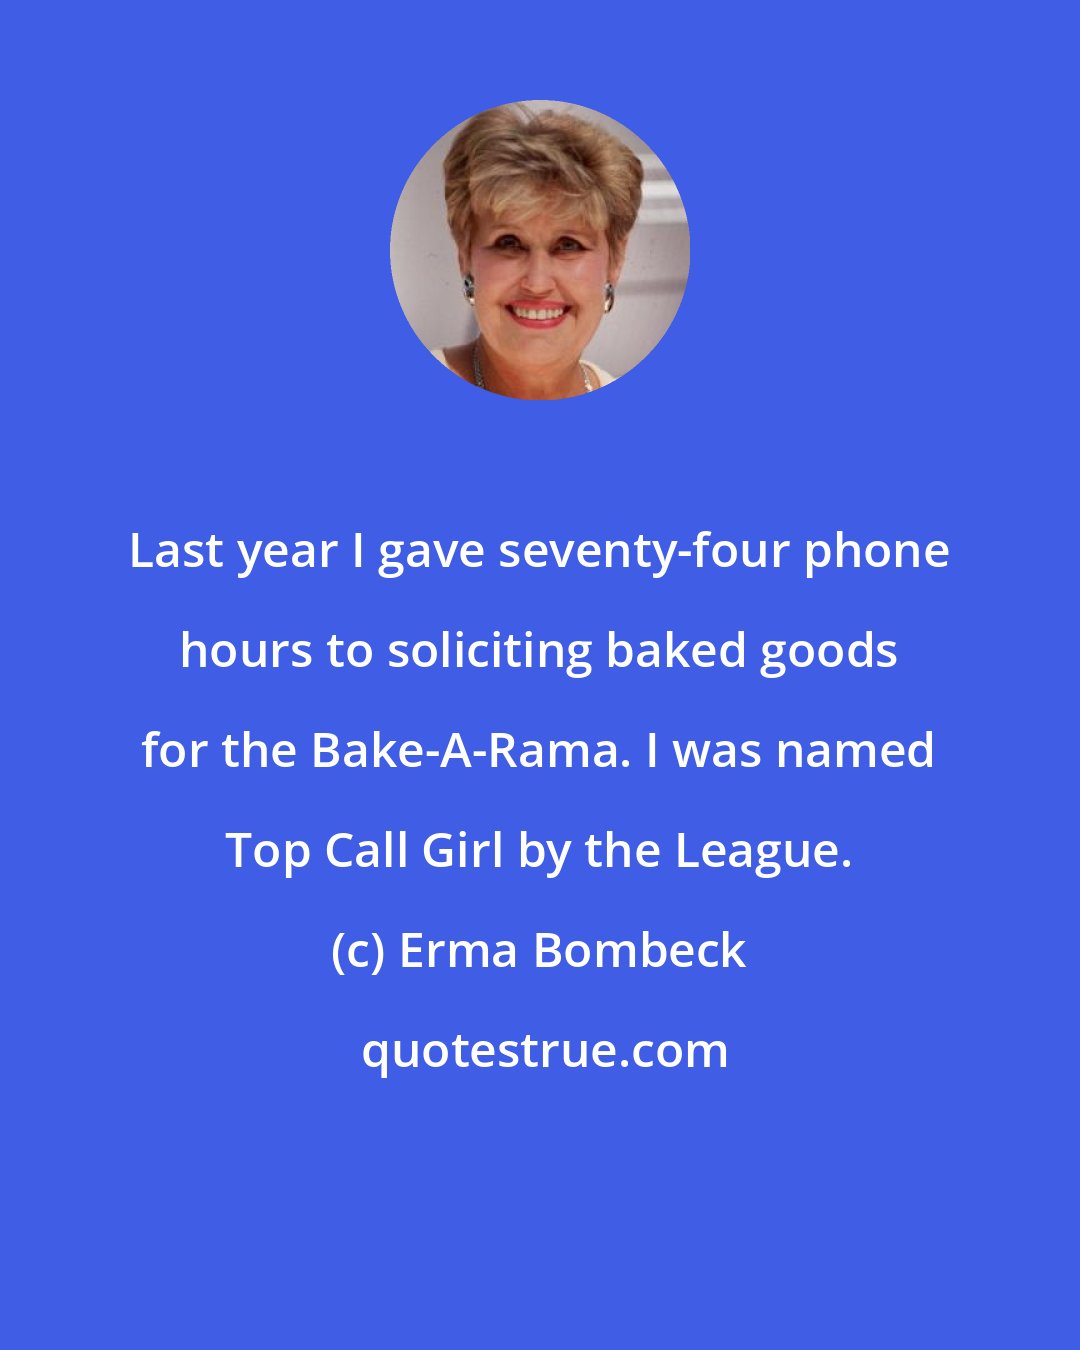 Erma Bombeck: Last year I gave seventy-four phone hours to soliciting baked goods for the Bake-A-Rama. I was named Top Call Girl by the League.